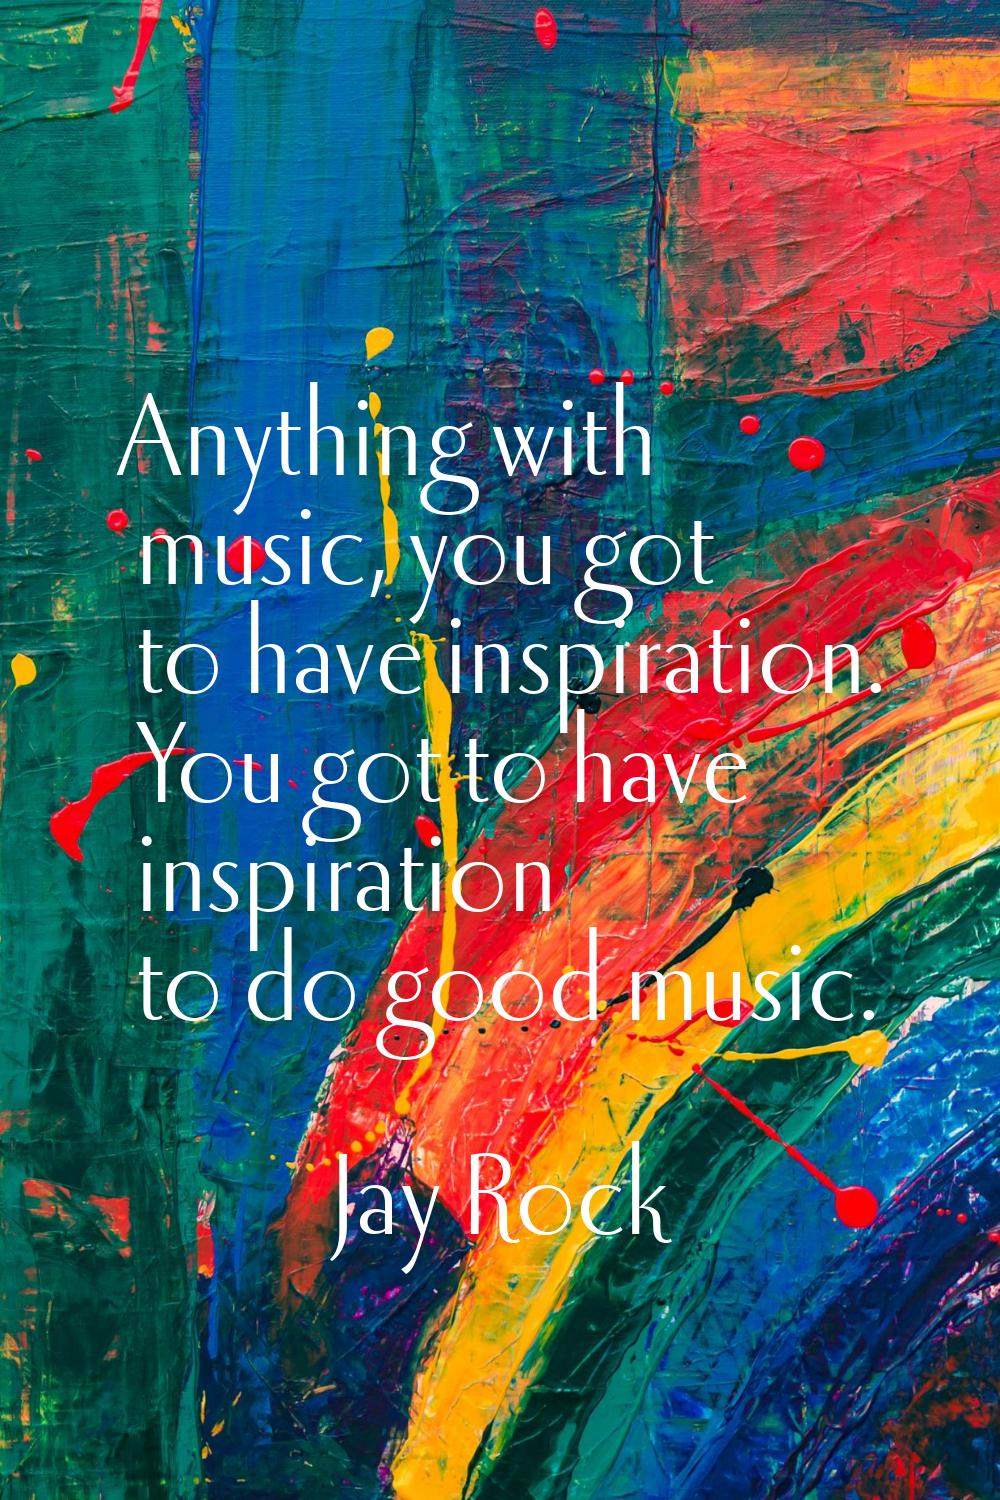 Anything with music, you got to have inspiration. You got to have inspiration to do good music.